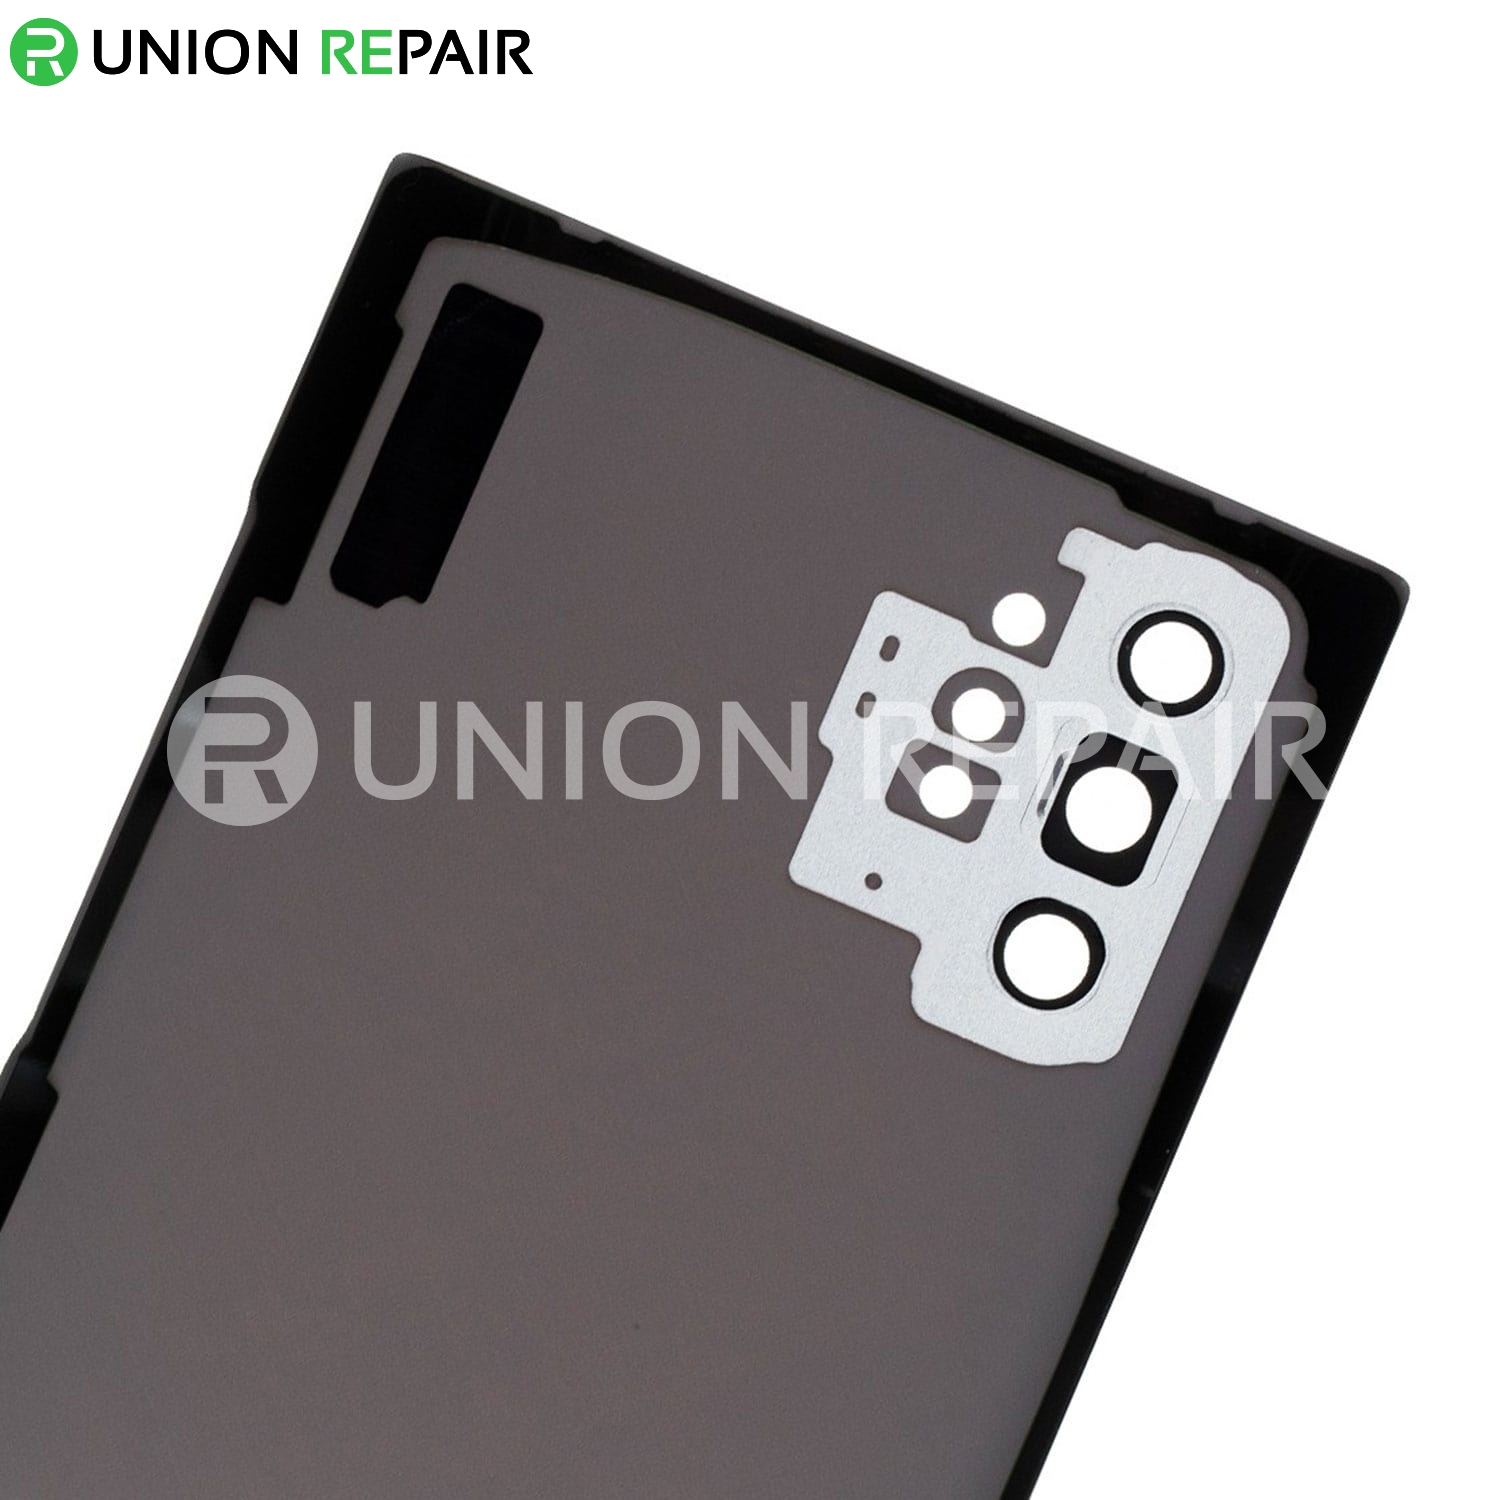 Replacement for Samsung Galaxy Note 10 Plus Battery Door - Aura White